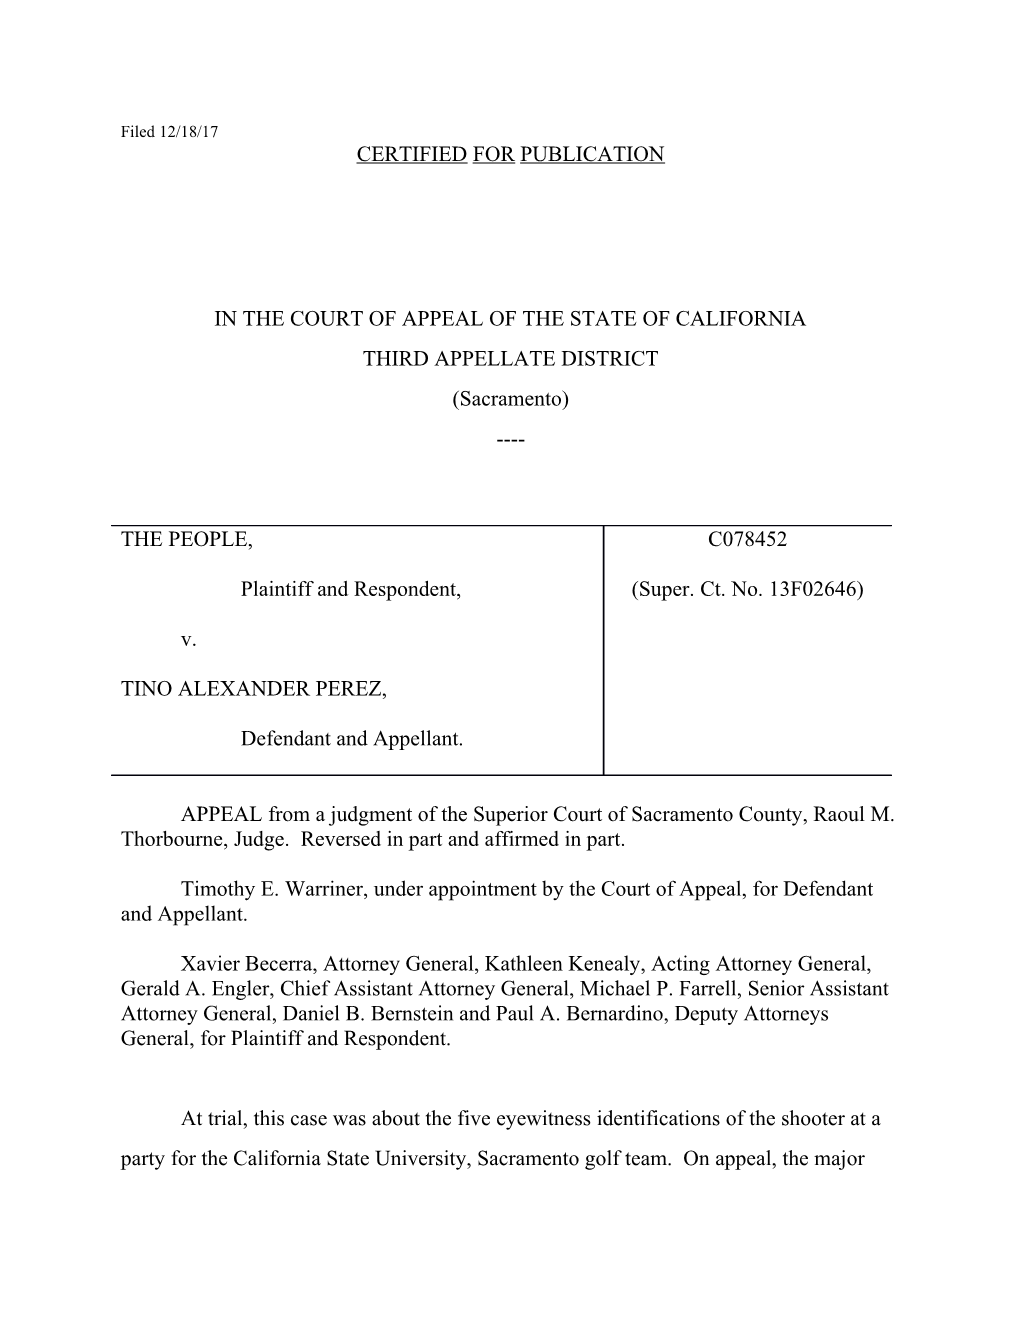 In the Court of Appeal of the State of California s8